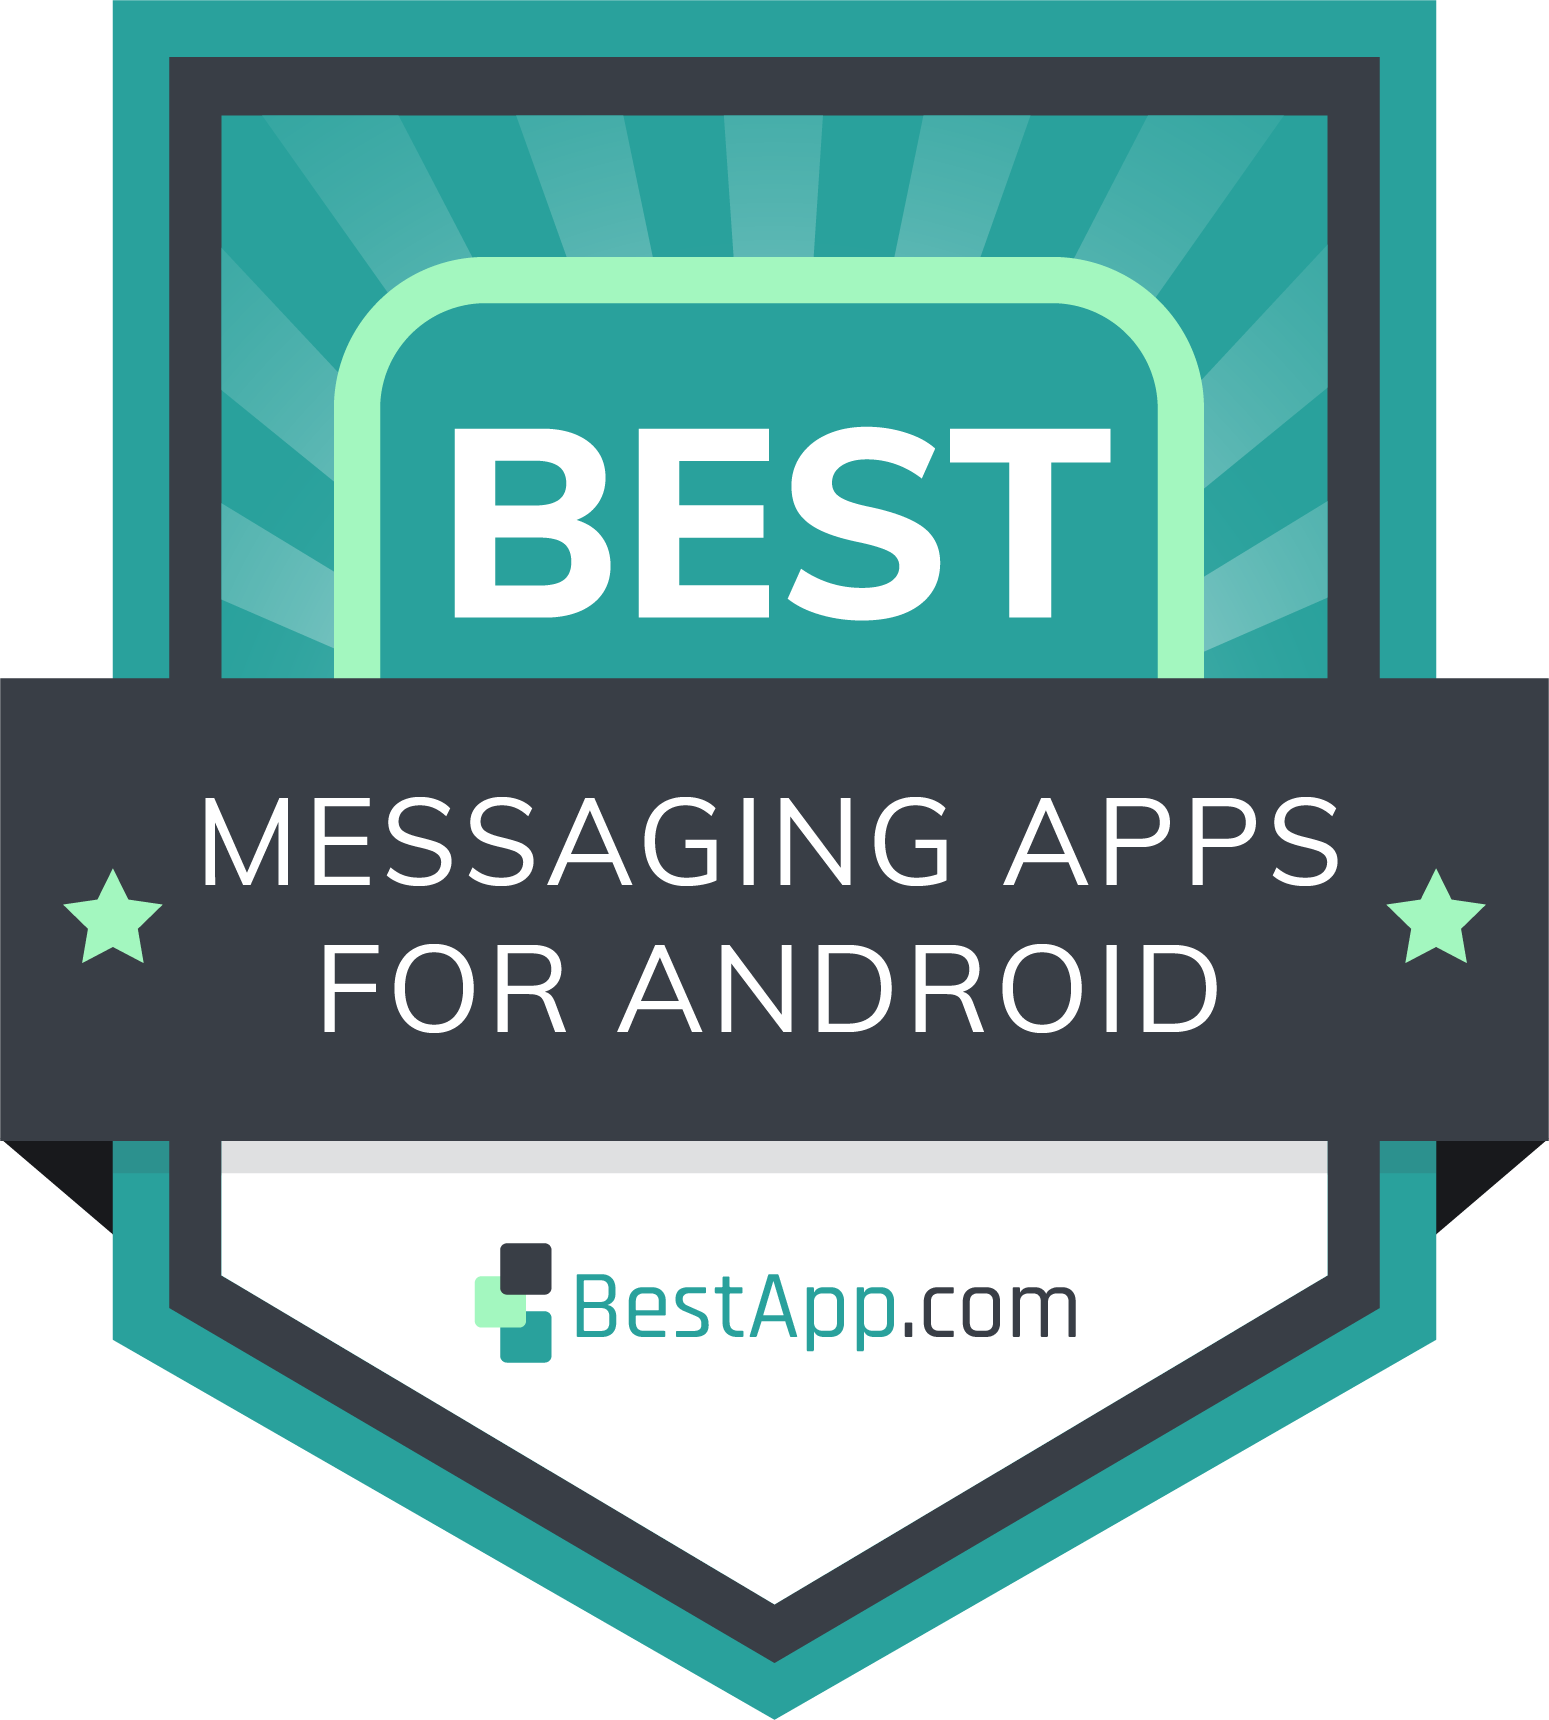 Best Messaging Apps for Android Badge